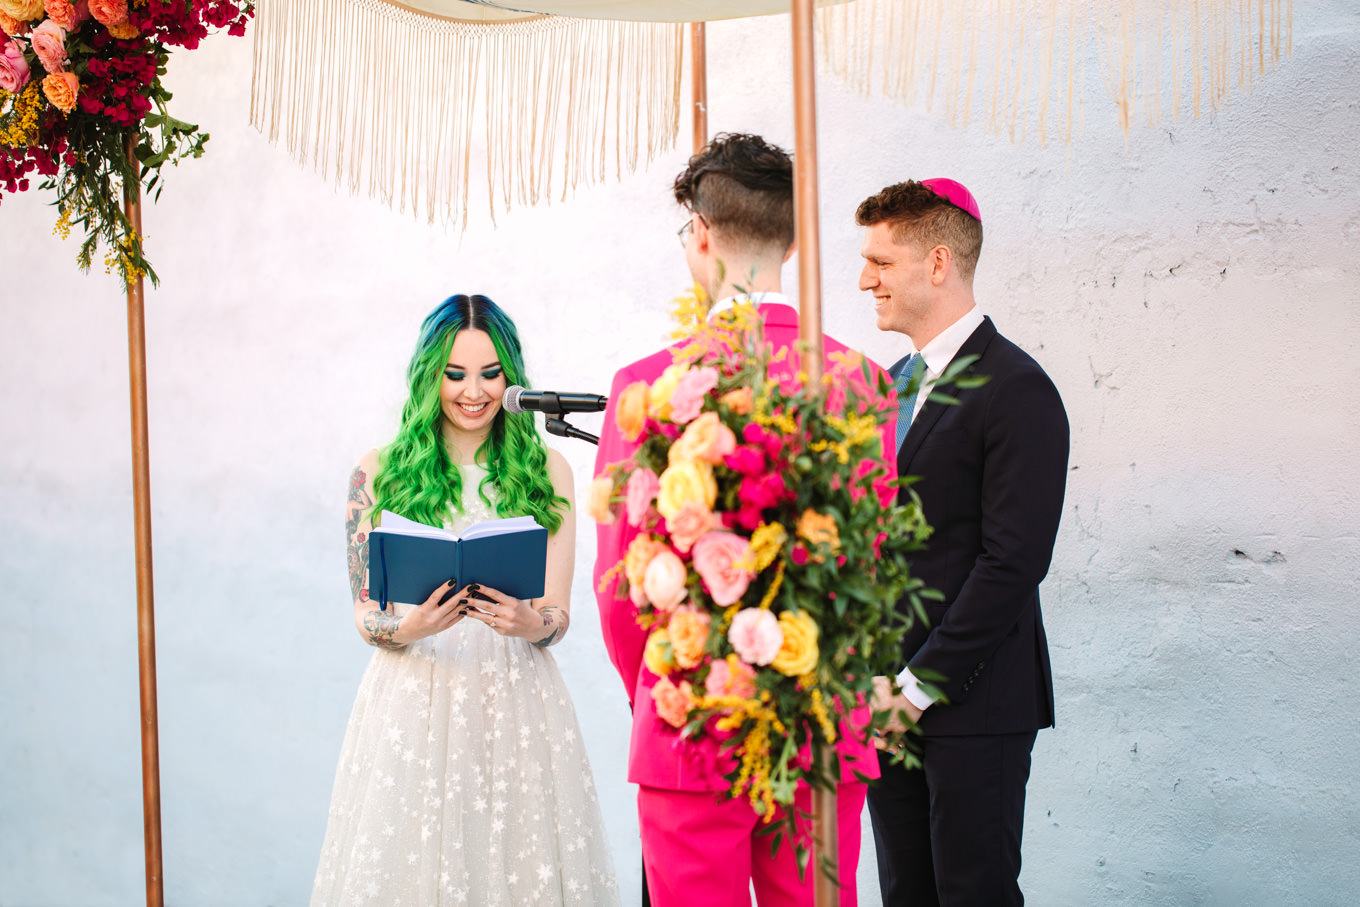 Bride with green hair reading wedding vows | Colorful wedding at The Unique Space Los Angeles published in The Knot Magazine | Fresh and colorful photography for fun-loving couples in Southern California | #colorfulwedding #losangeleswedding #weddingphotography #uniquespace Source: Mary Costa Photography | Los Angeles